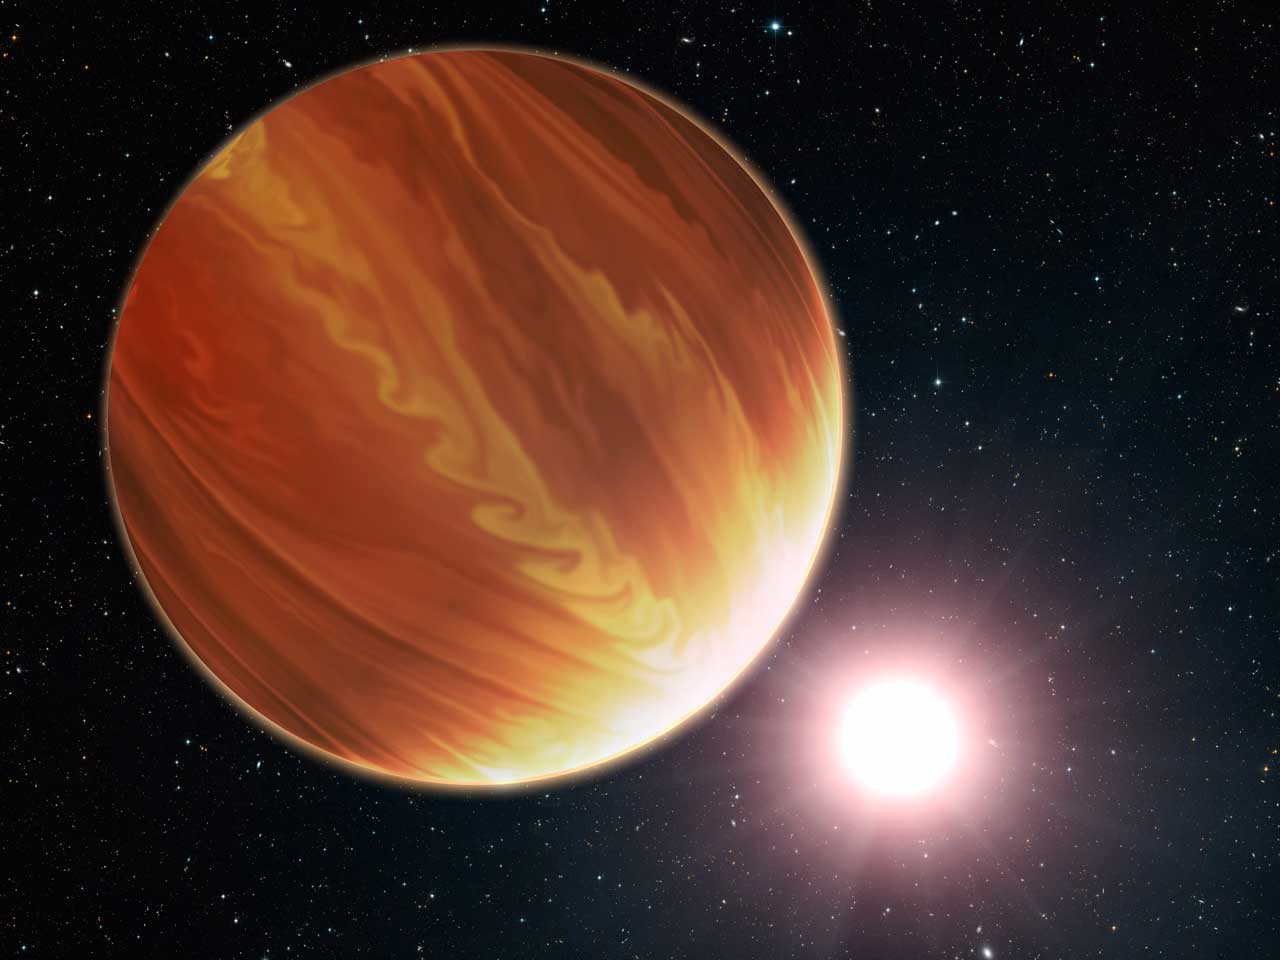 An exoplanet seen orbiting a star in an illustration